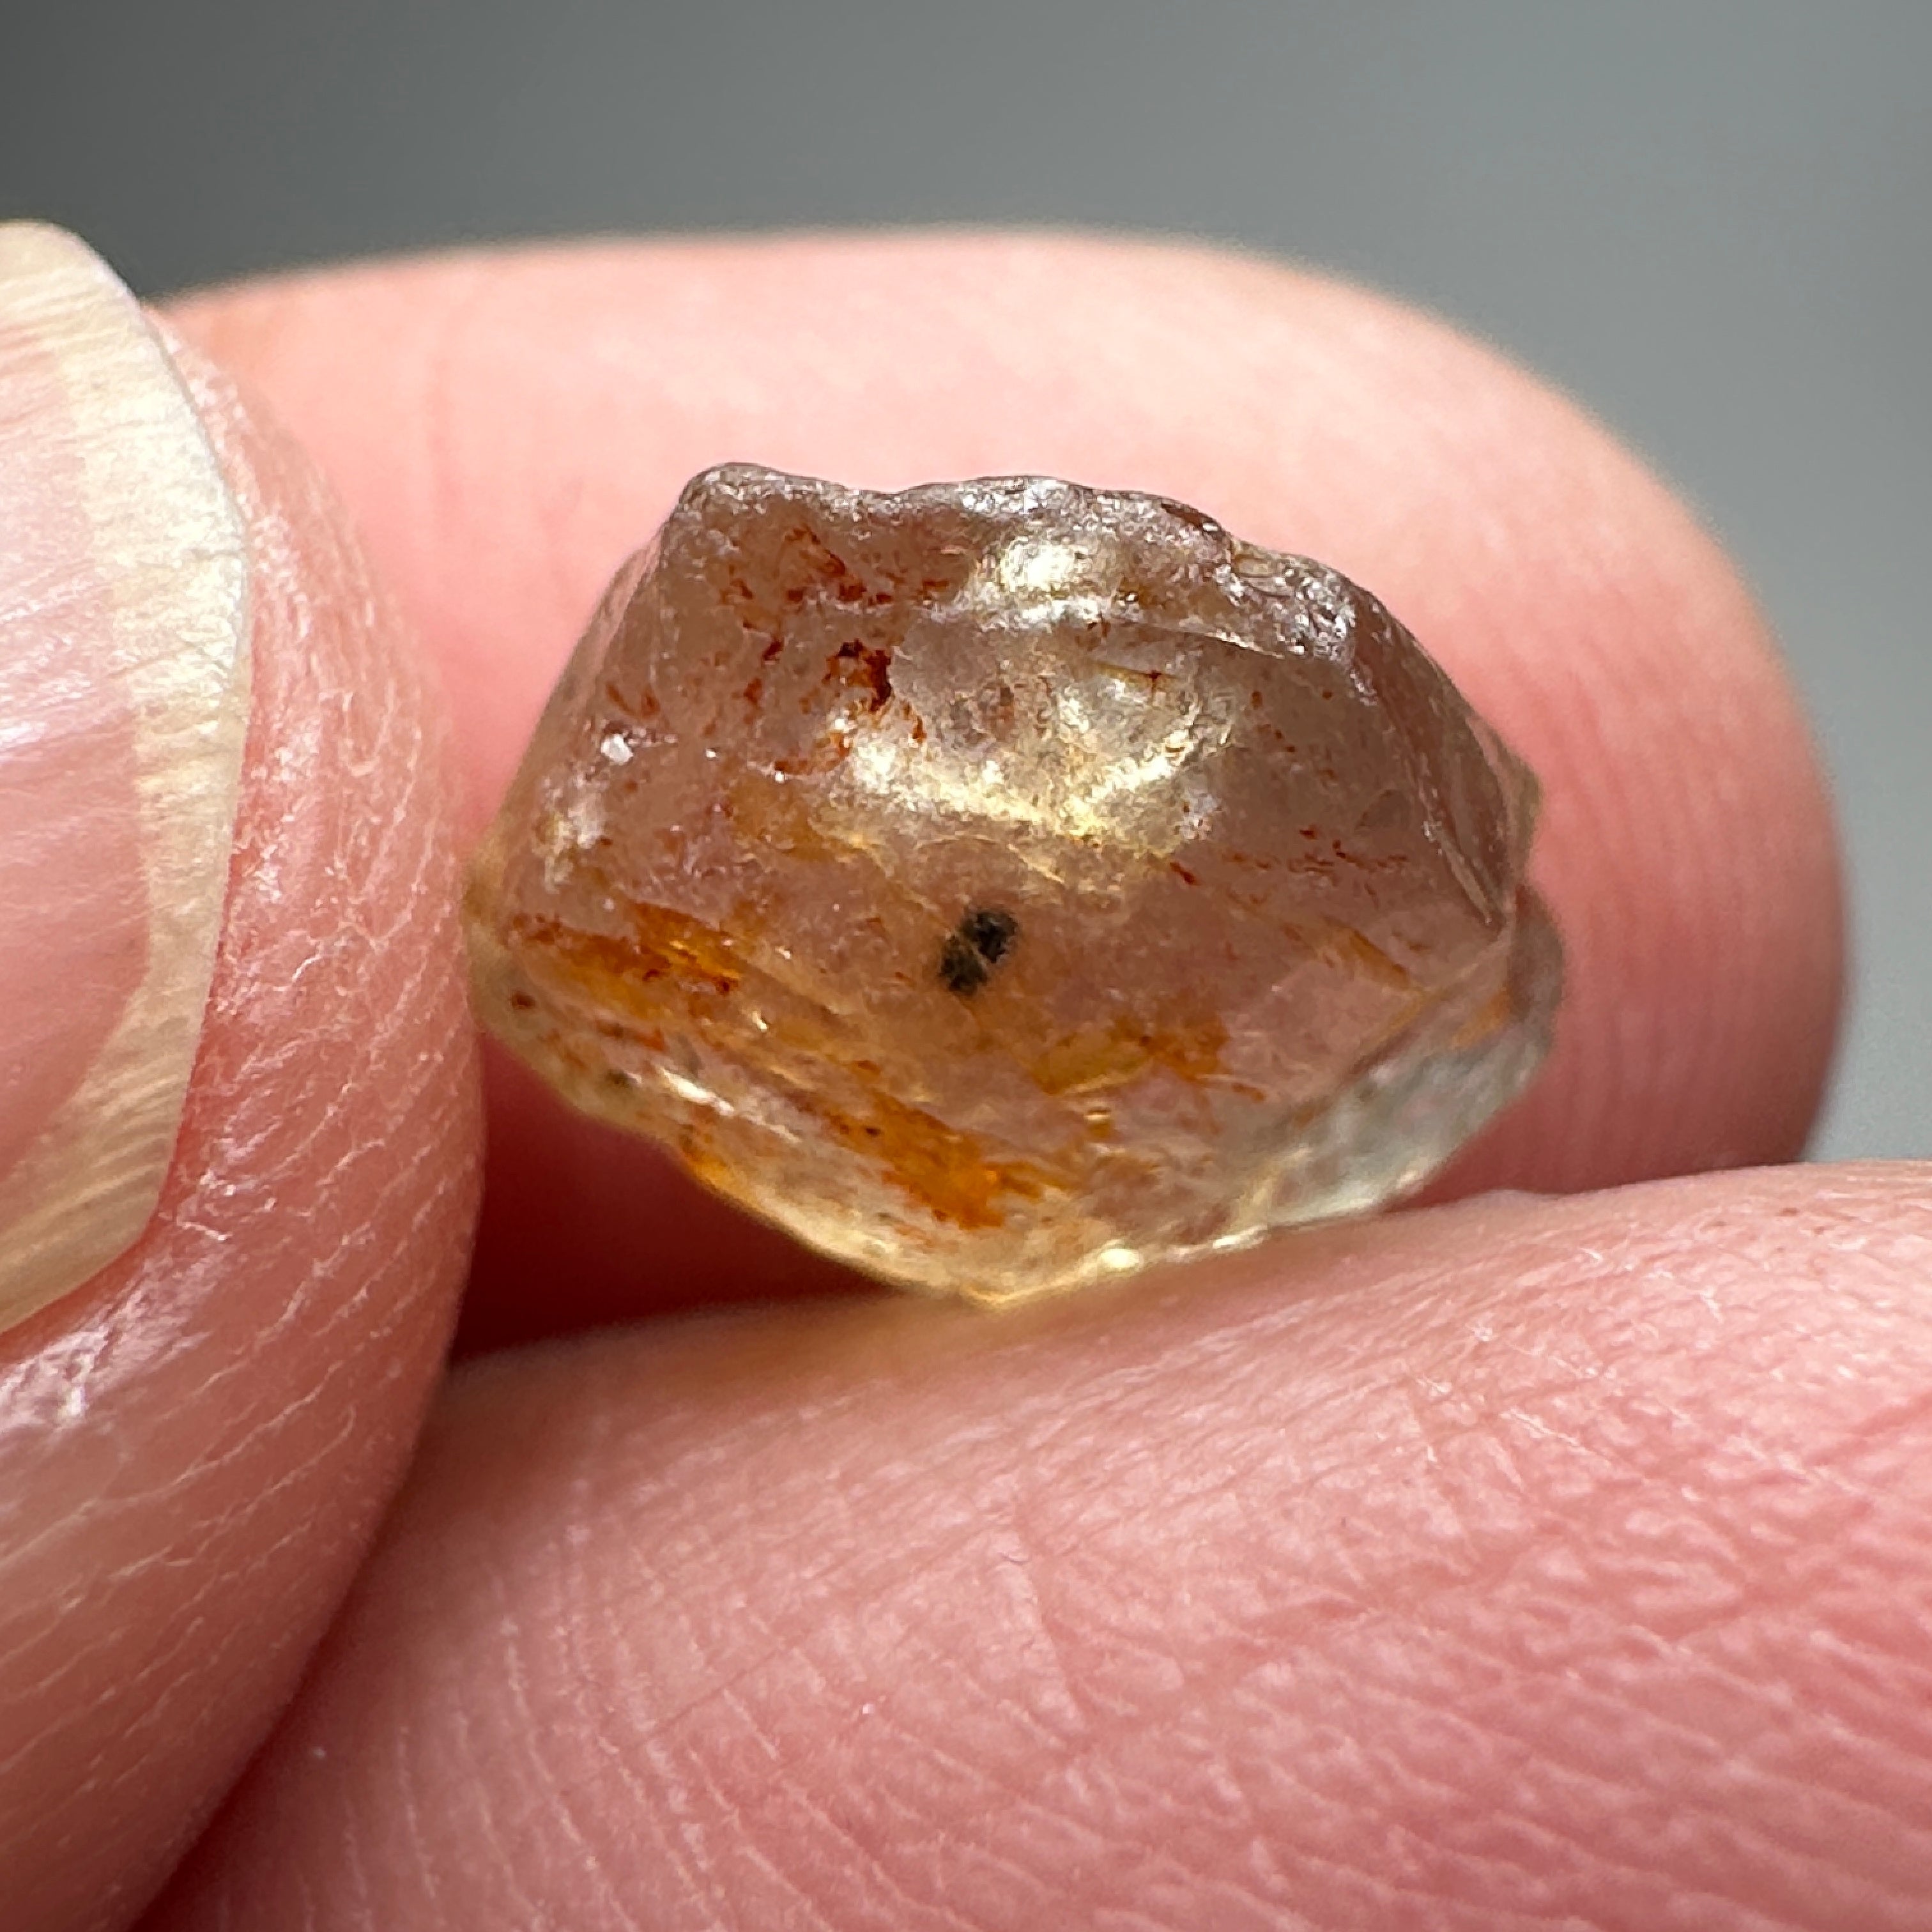 4.14ct Umba Sapphire, Umba Valley, Tanzania, Untreated Unheated. Slight inclusion on the outside with a small black spot rest VS